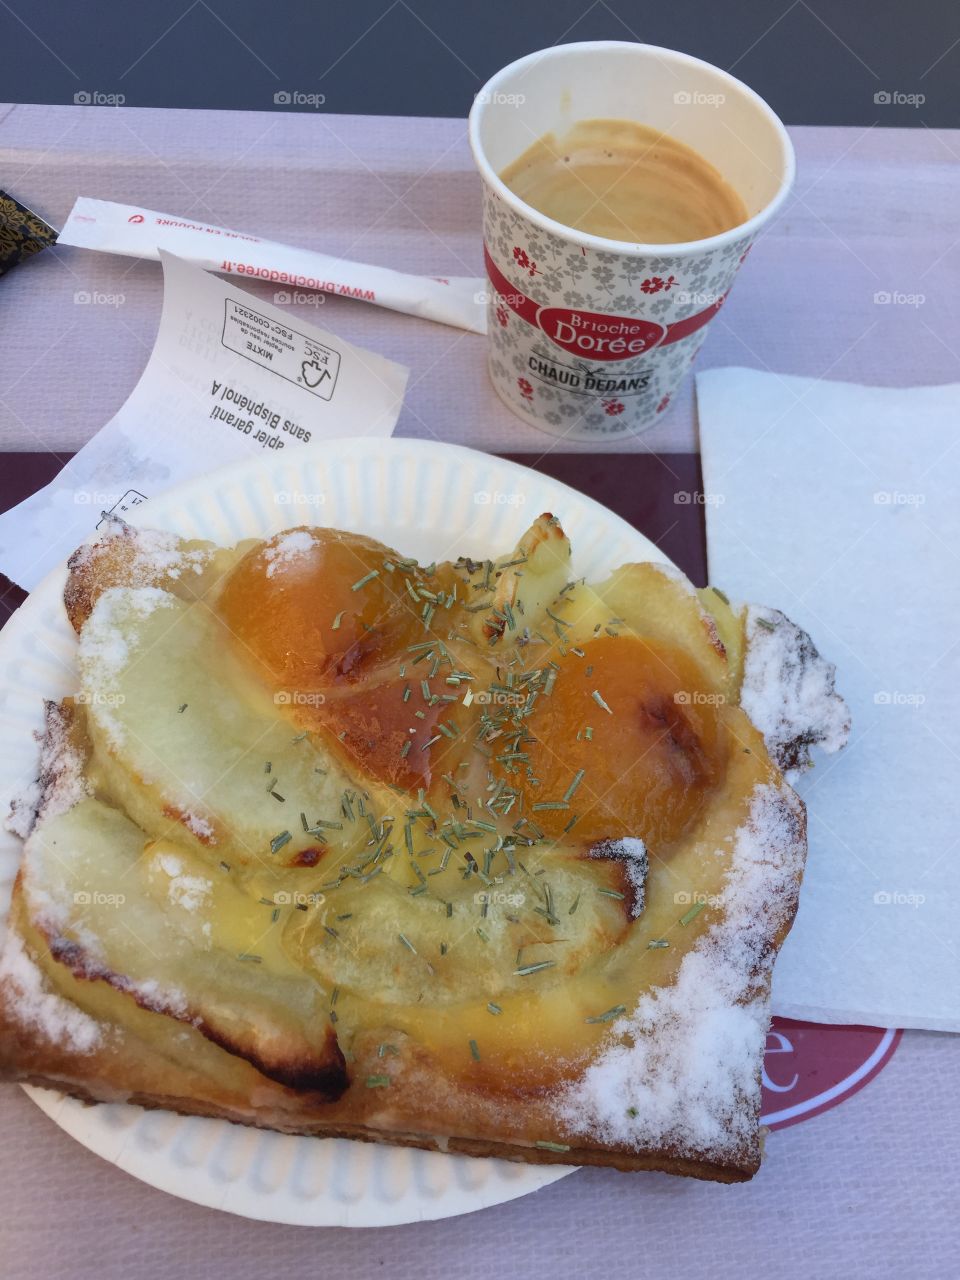 Breakfast on the go in Strasbourg France with coffee cup